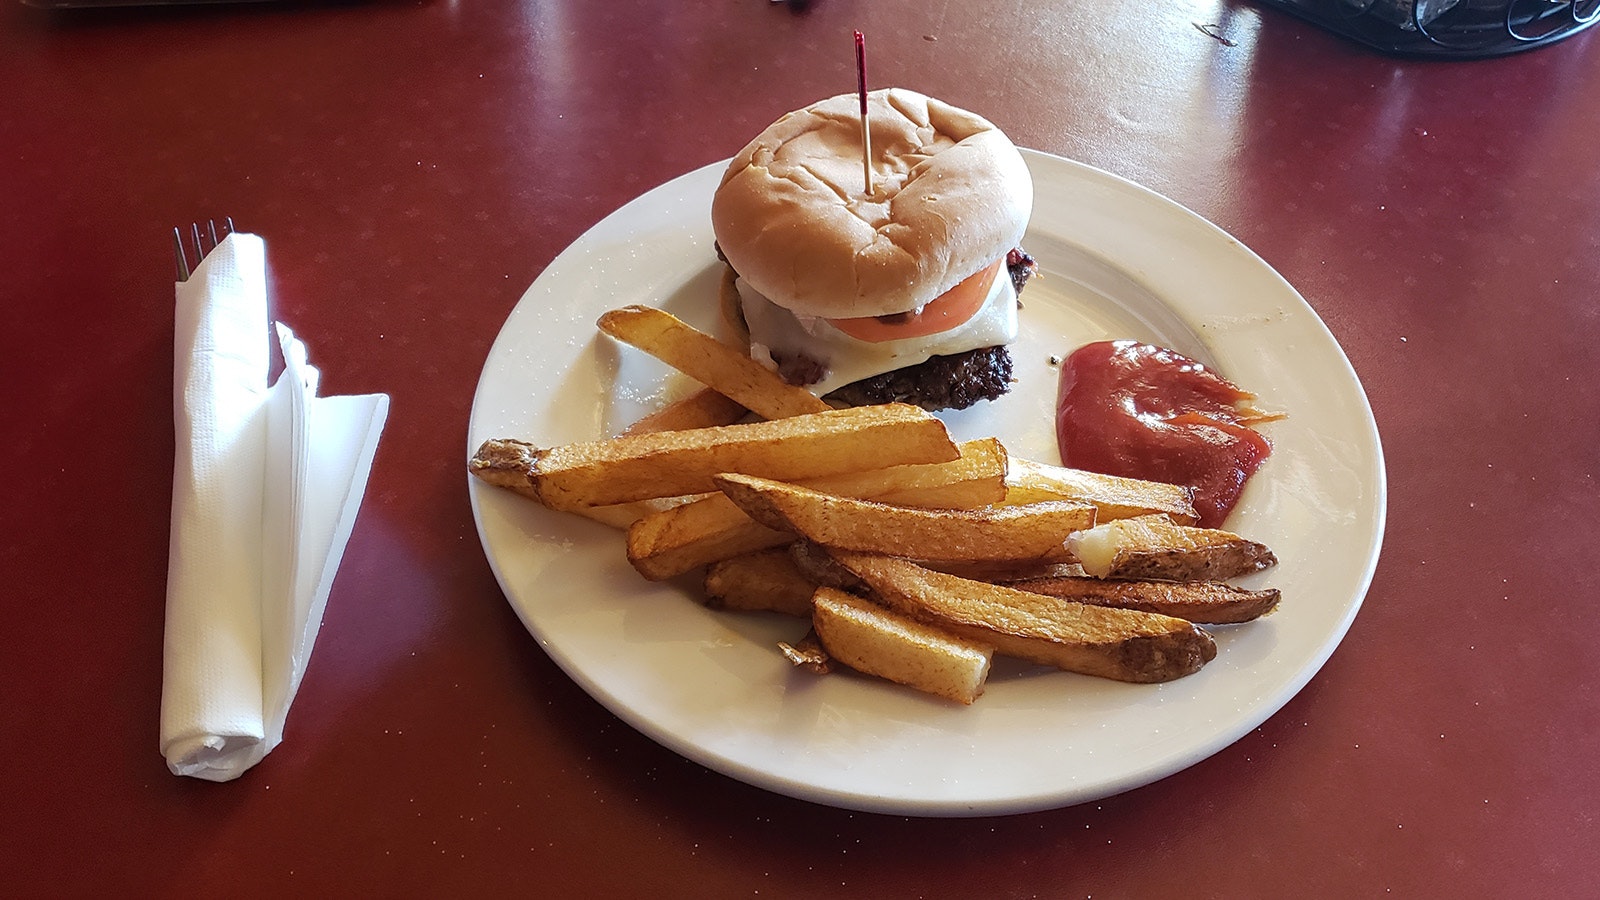 The kitchen turns out a great burger at The Virginian, served with handout home fries.